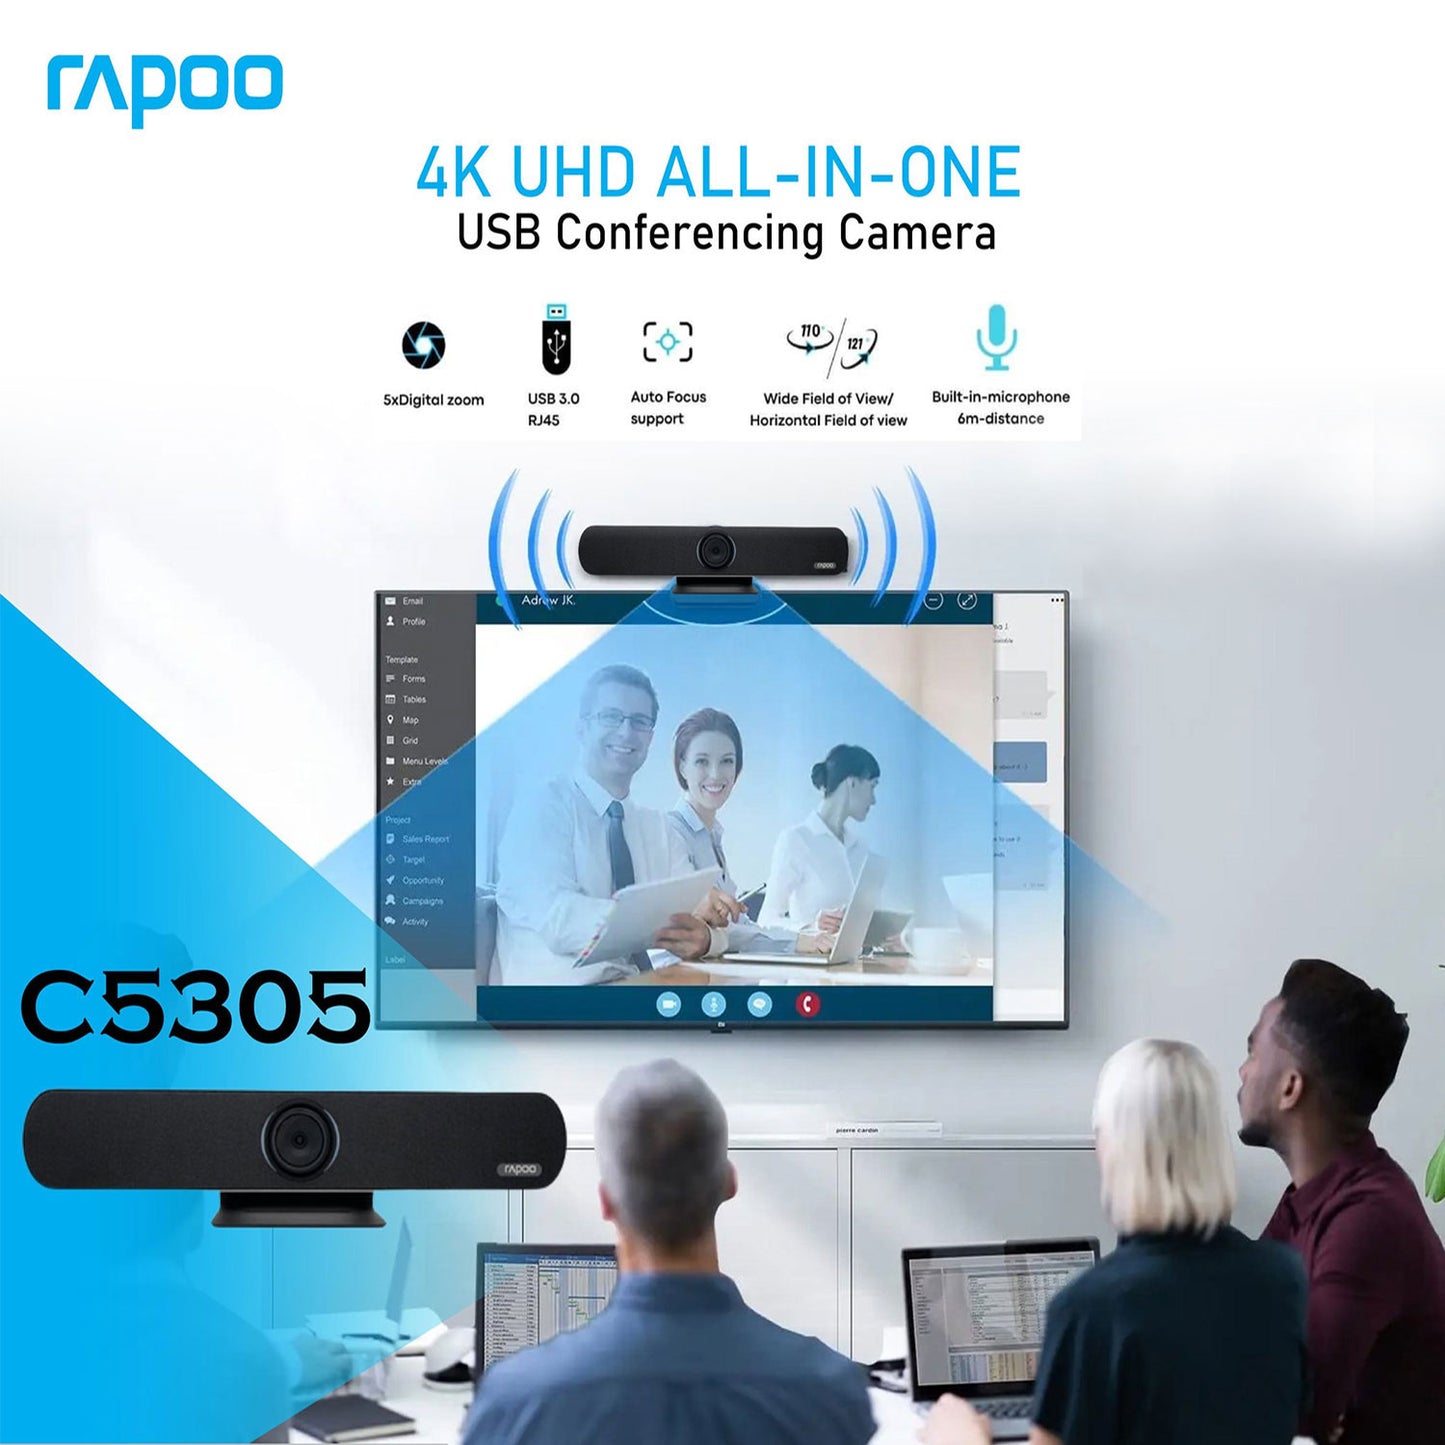 Rapoo C5305 Ultra 4K HD All-In-One USB Video Conference Webcam Full frequency Hi-Fi loudspeaker, support HDMI 1.4b, USB3.0 for Zoom/Skype/Teams, Conferencing and Video Calls